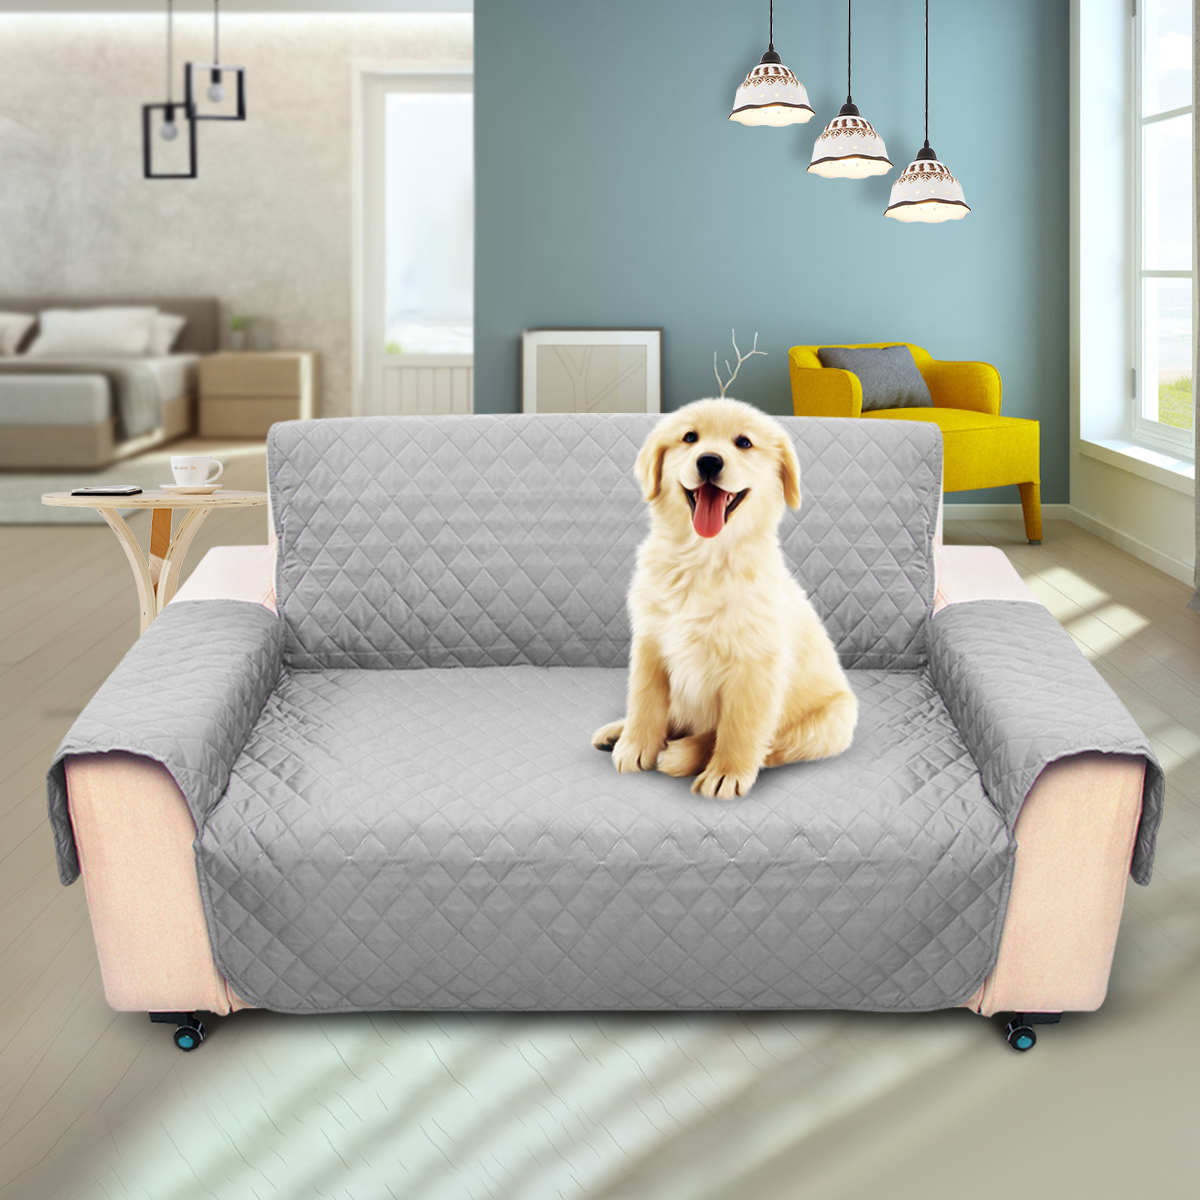 2 Seater Pet Sofa Couch Protector Cover, Pet Sofa Protector Uk